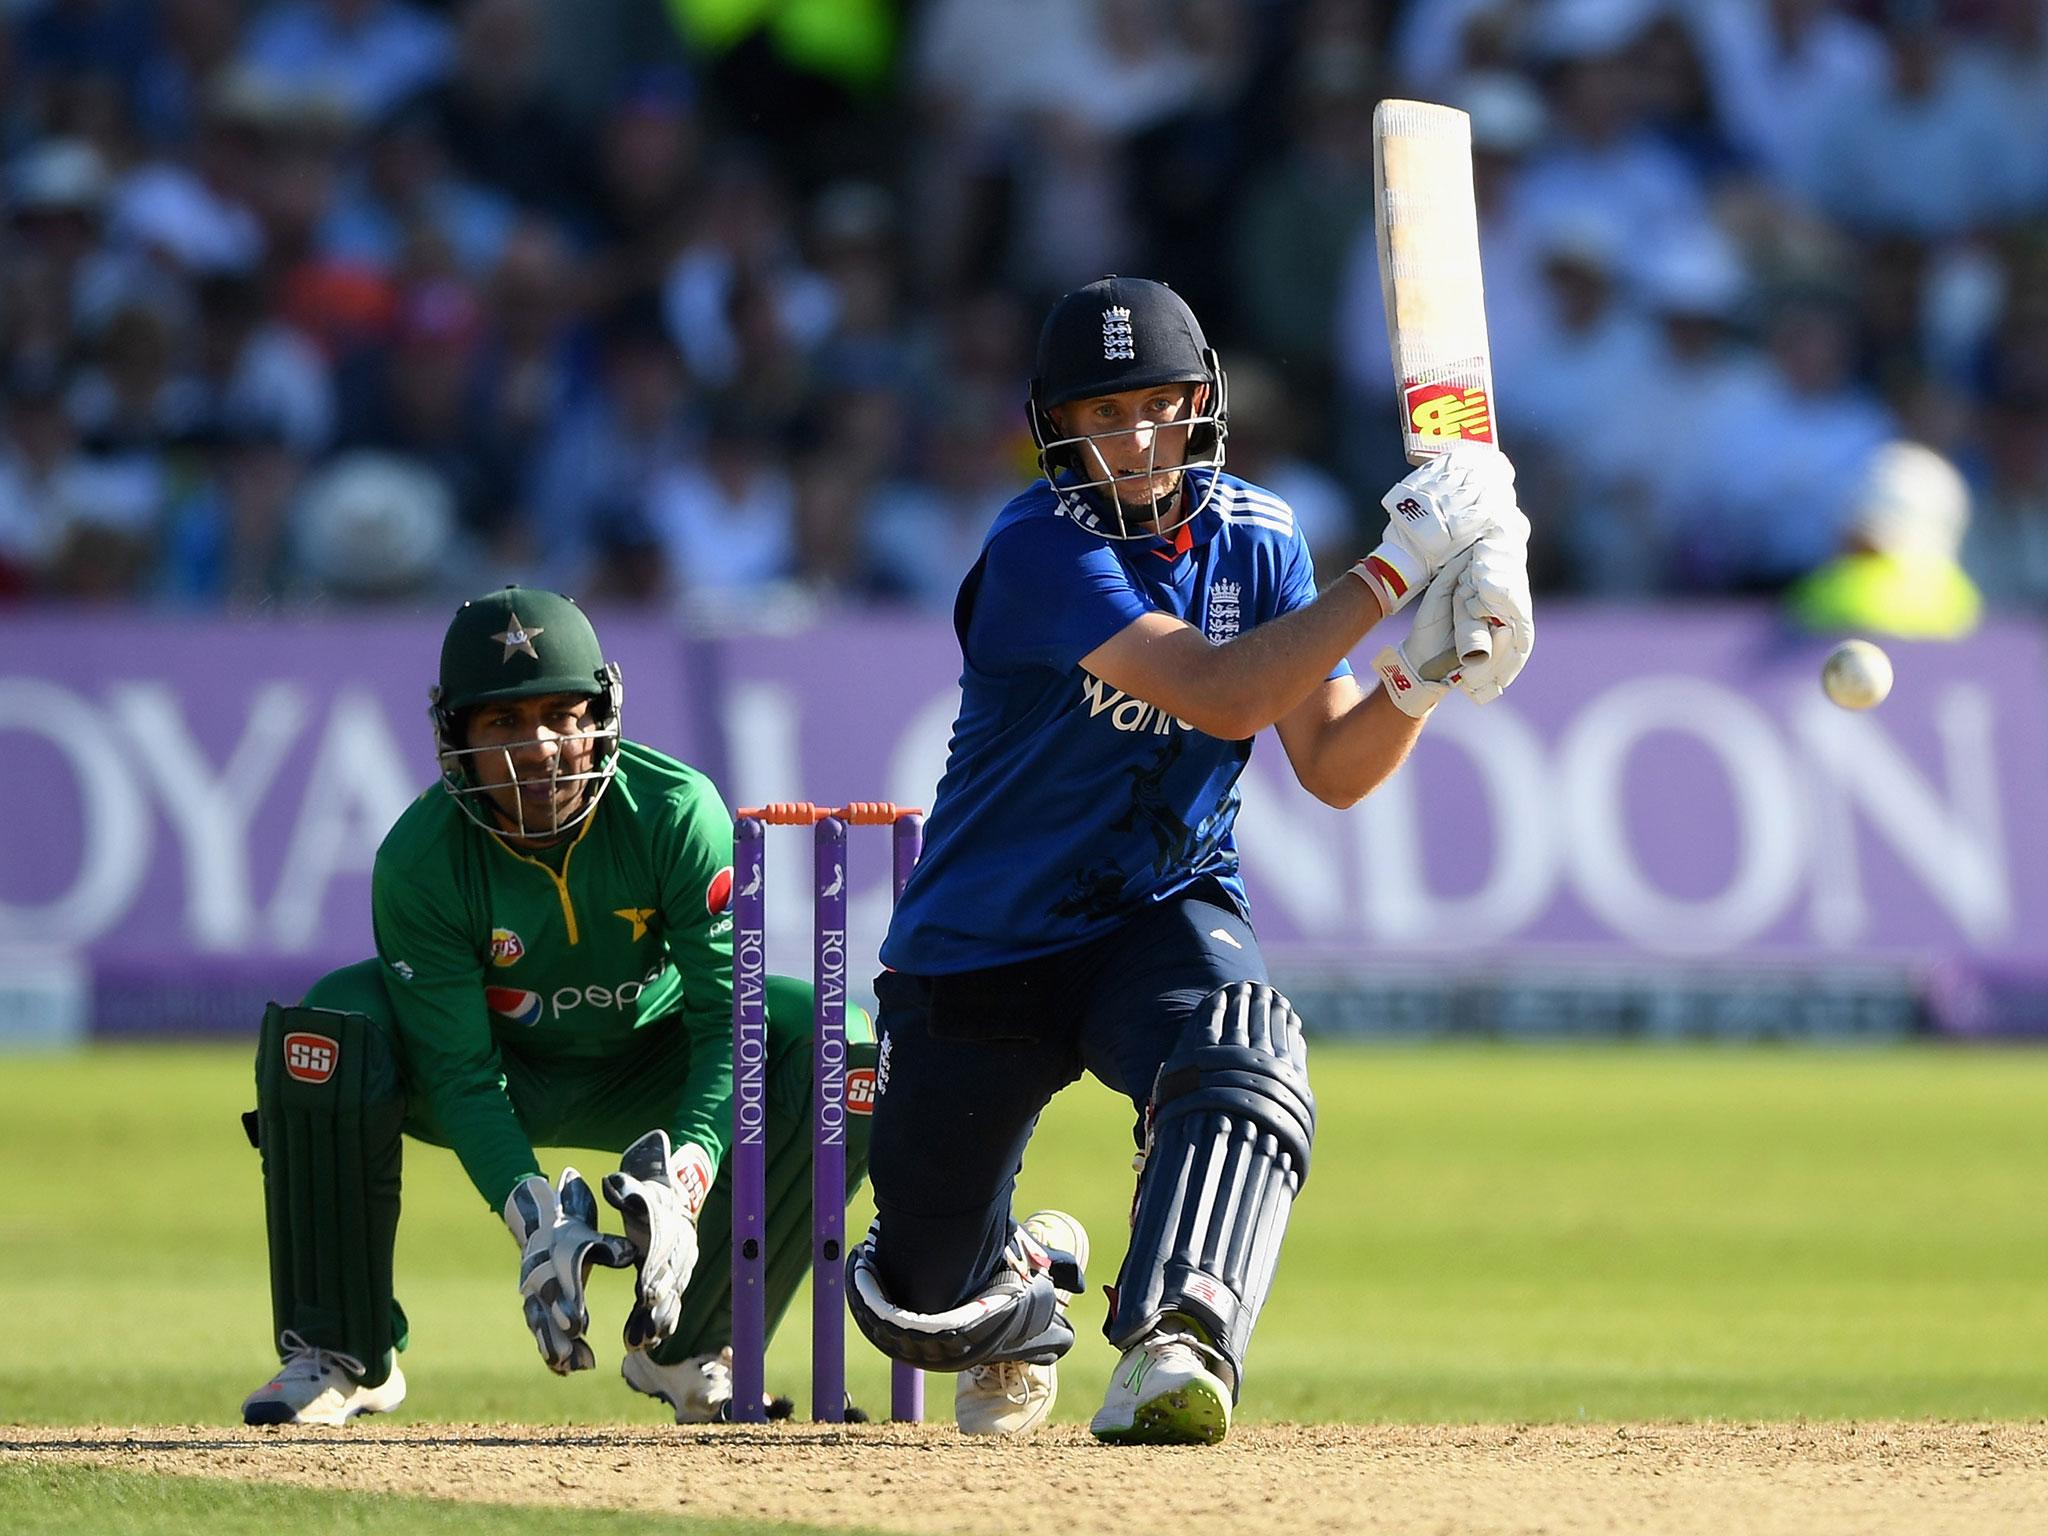 Yorkshire’s Joe Root played some exquisite shots for England against Pakistan